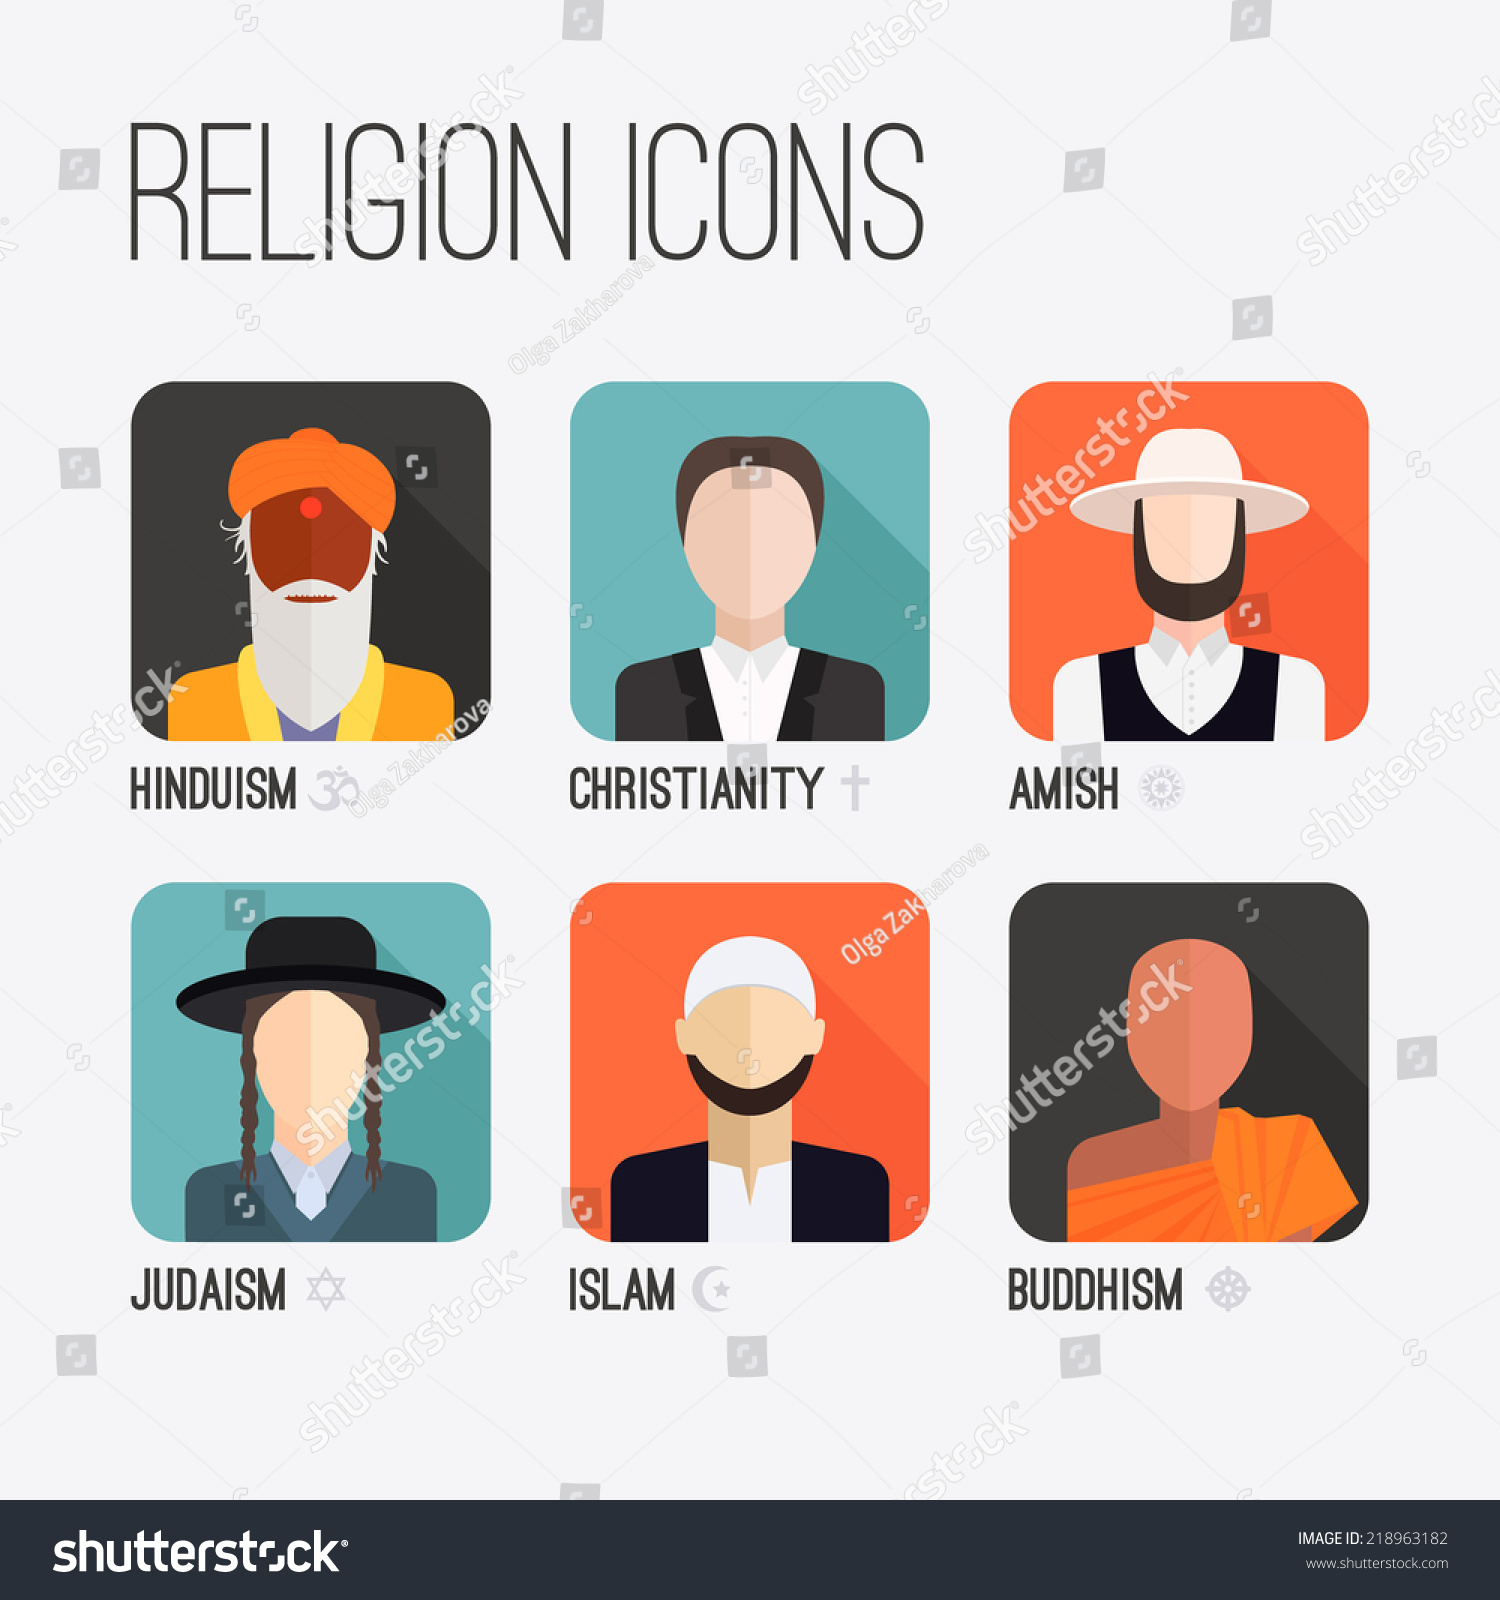 SVG of People of different religion in traditional clothing. Islam, judaism, buddhism, christianity, hinduism, amish. Religion vector symbols and characters. svg